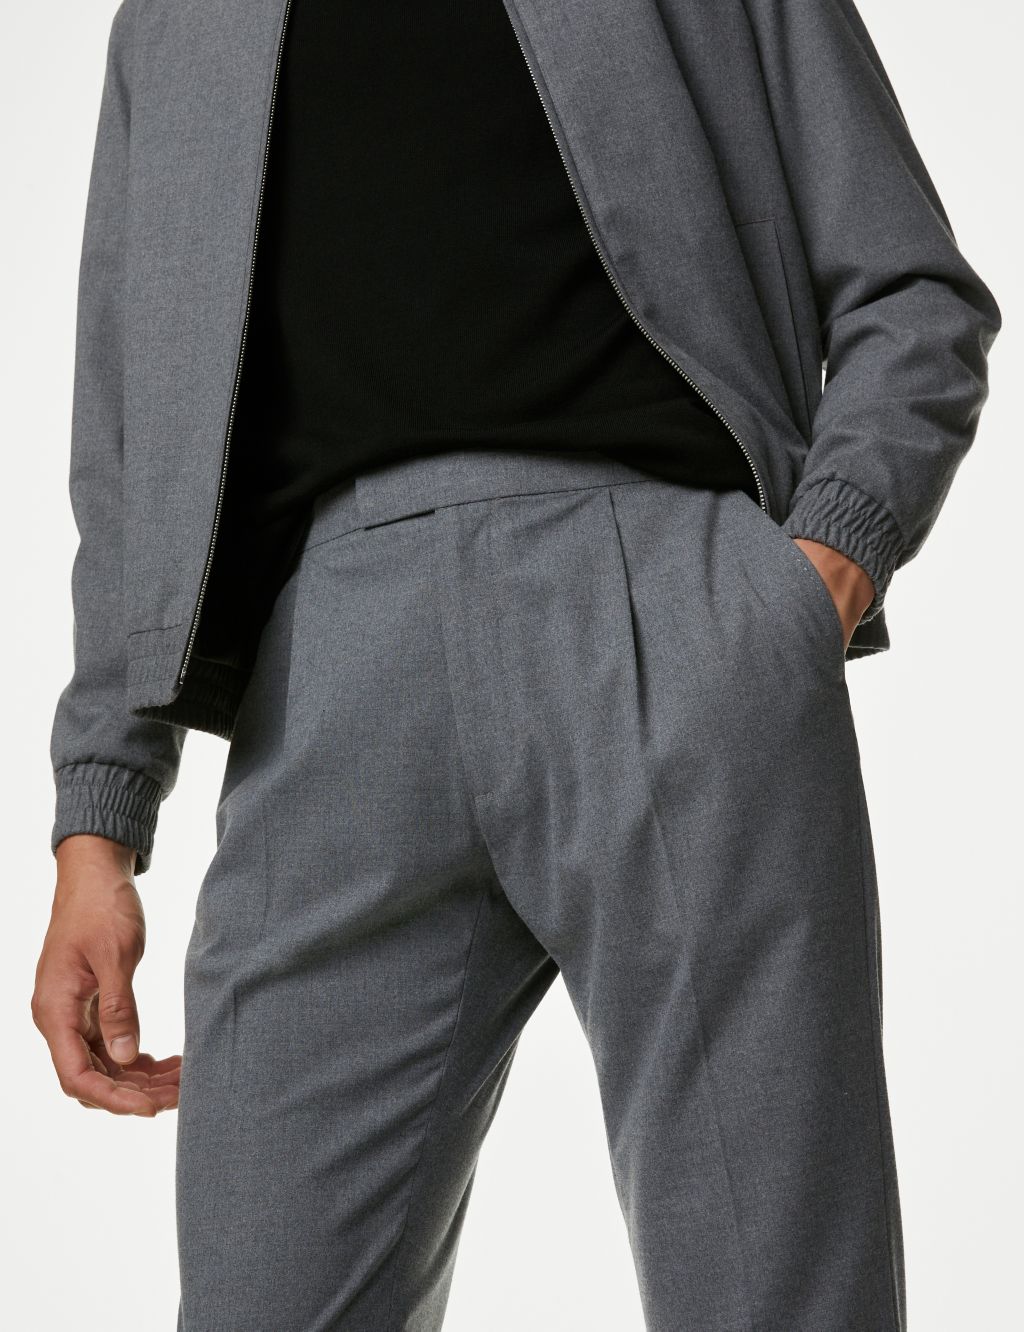 Single Pleat Brushed Stretch Trouser image 5